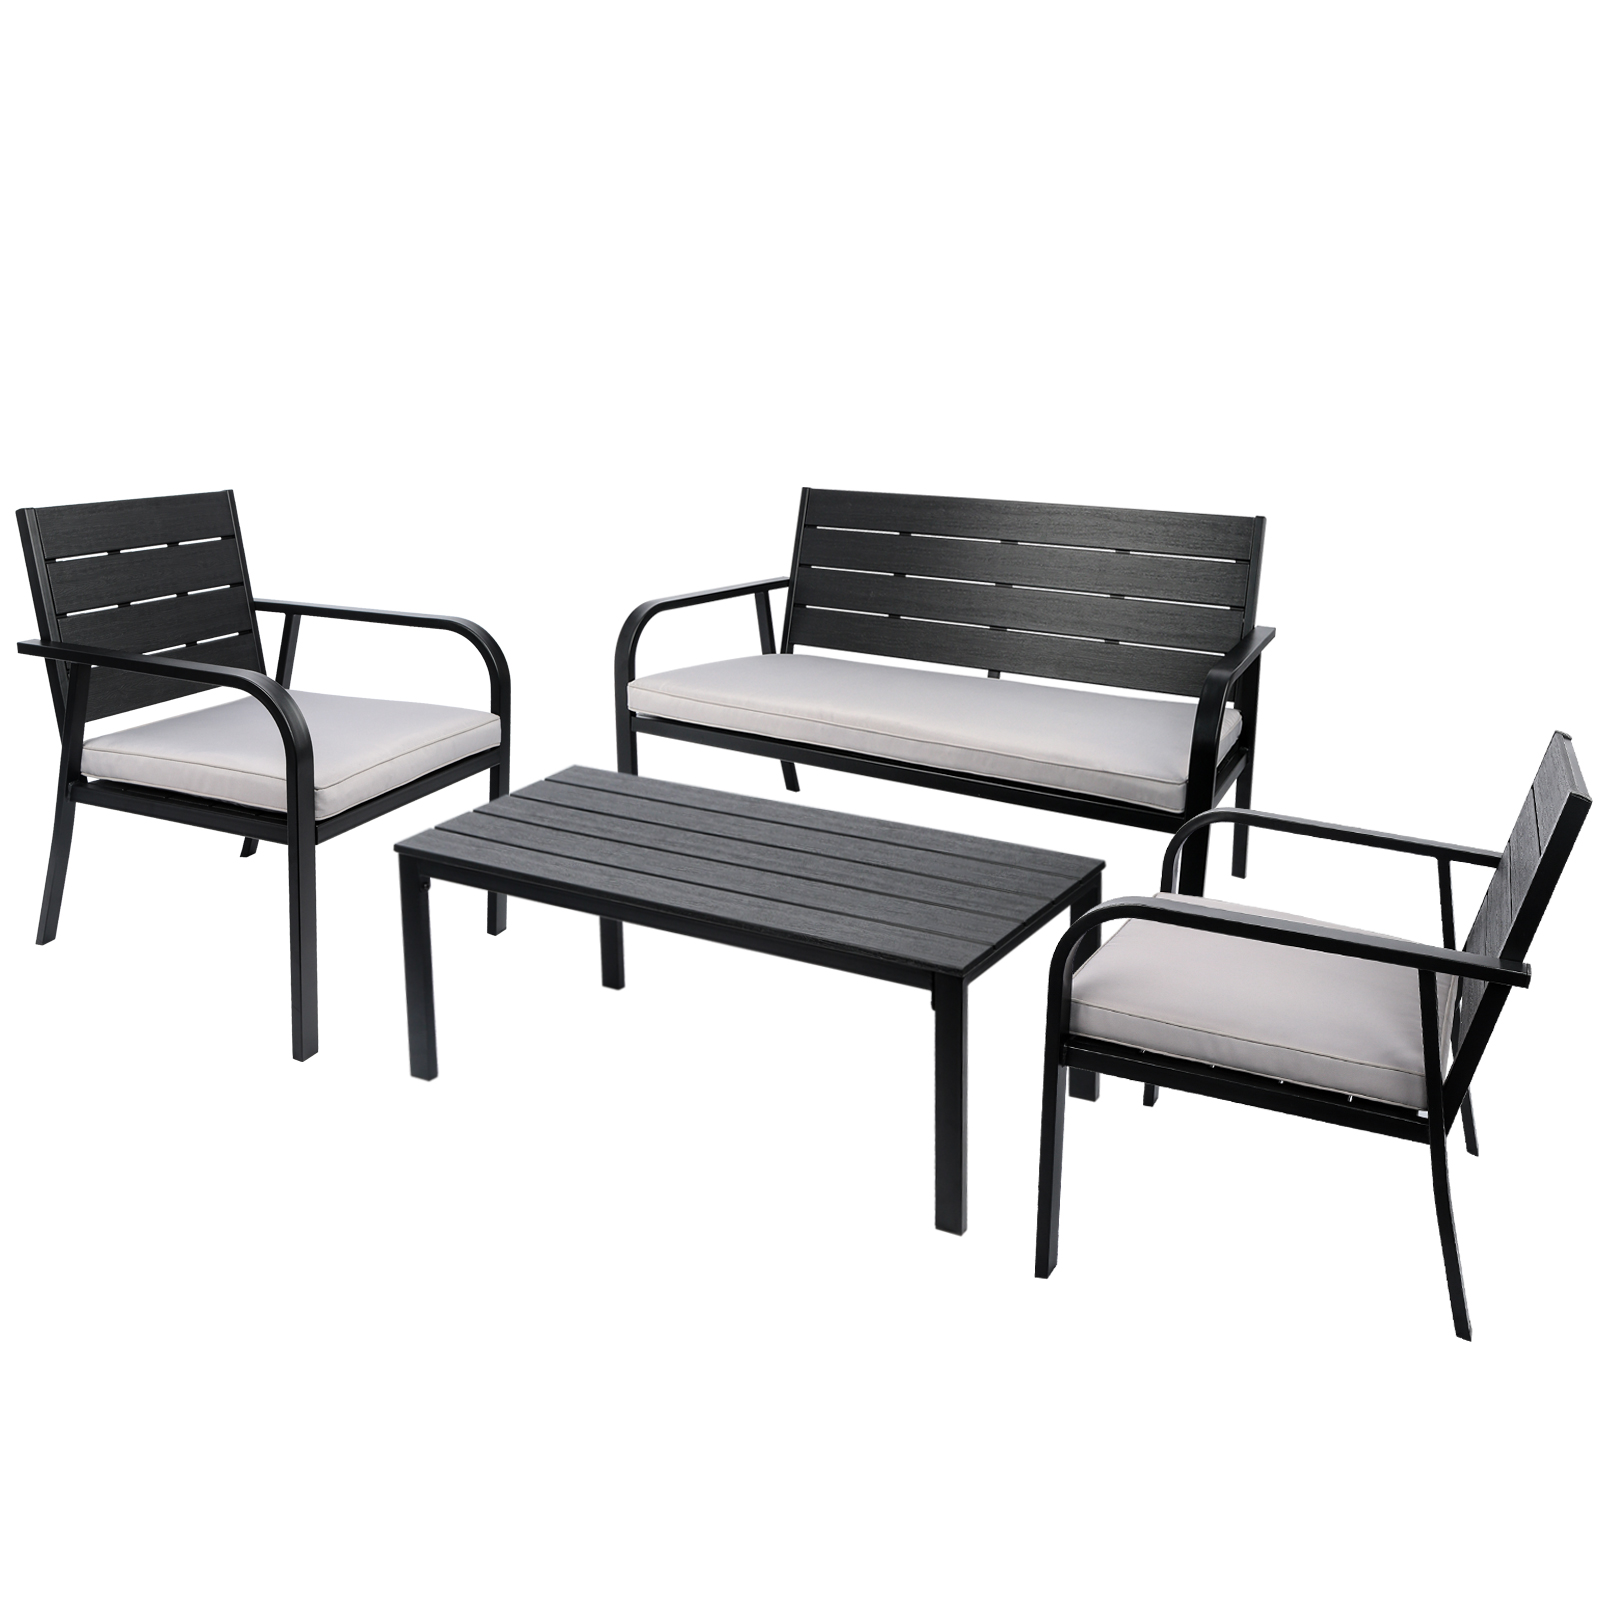 OWSOO 4 Pieces Patio Garden Sofa Conversation Set Wood Grain Design PE Steel Frame Loveseat All Weather  Furniture Set with Cushions Coffee Table for Backyard Balcony Lawn Black and Grey - image 1 of 7